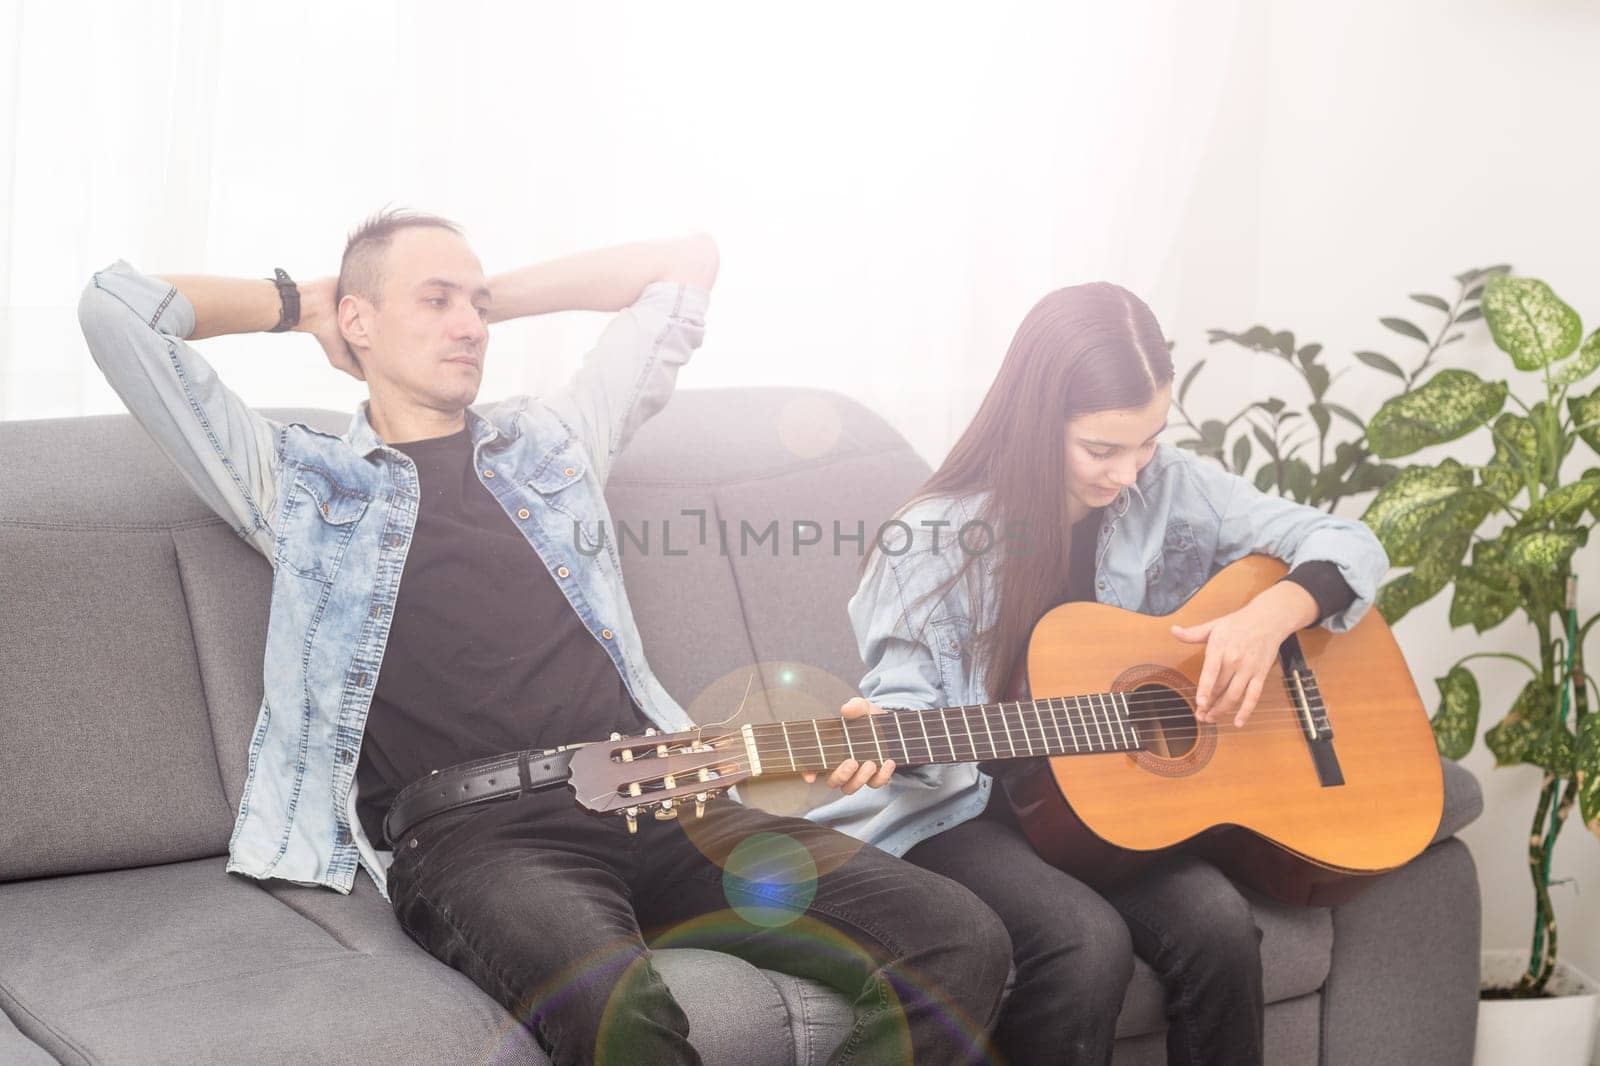 Artistic talented girl showing her latin music teacher the new song she learned to play on the acoustic guitar at home by Andelov13